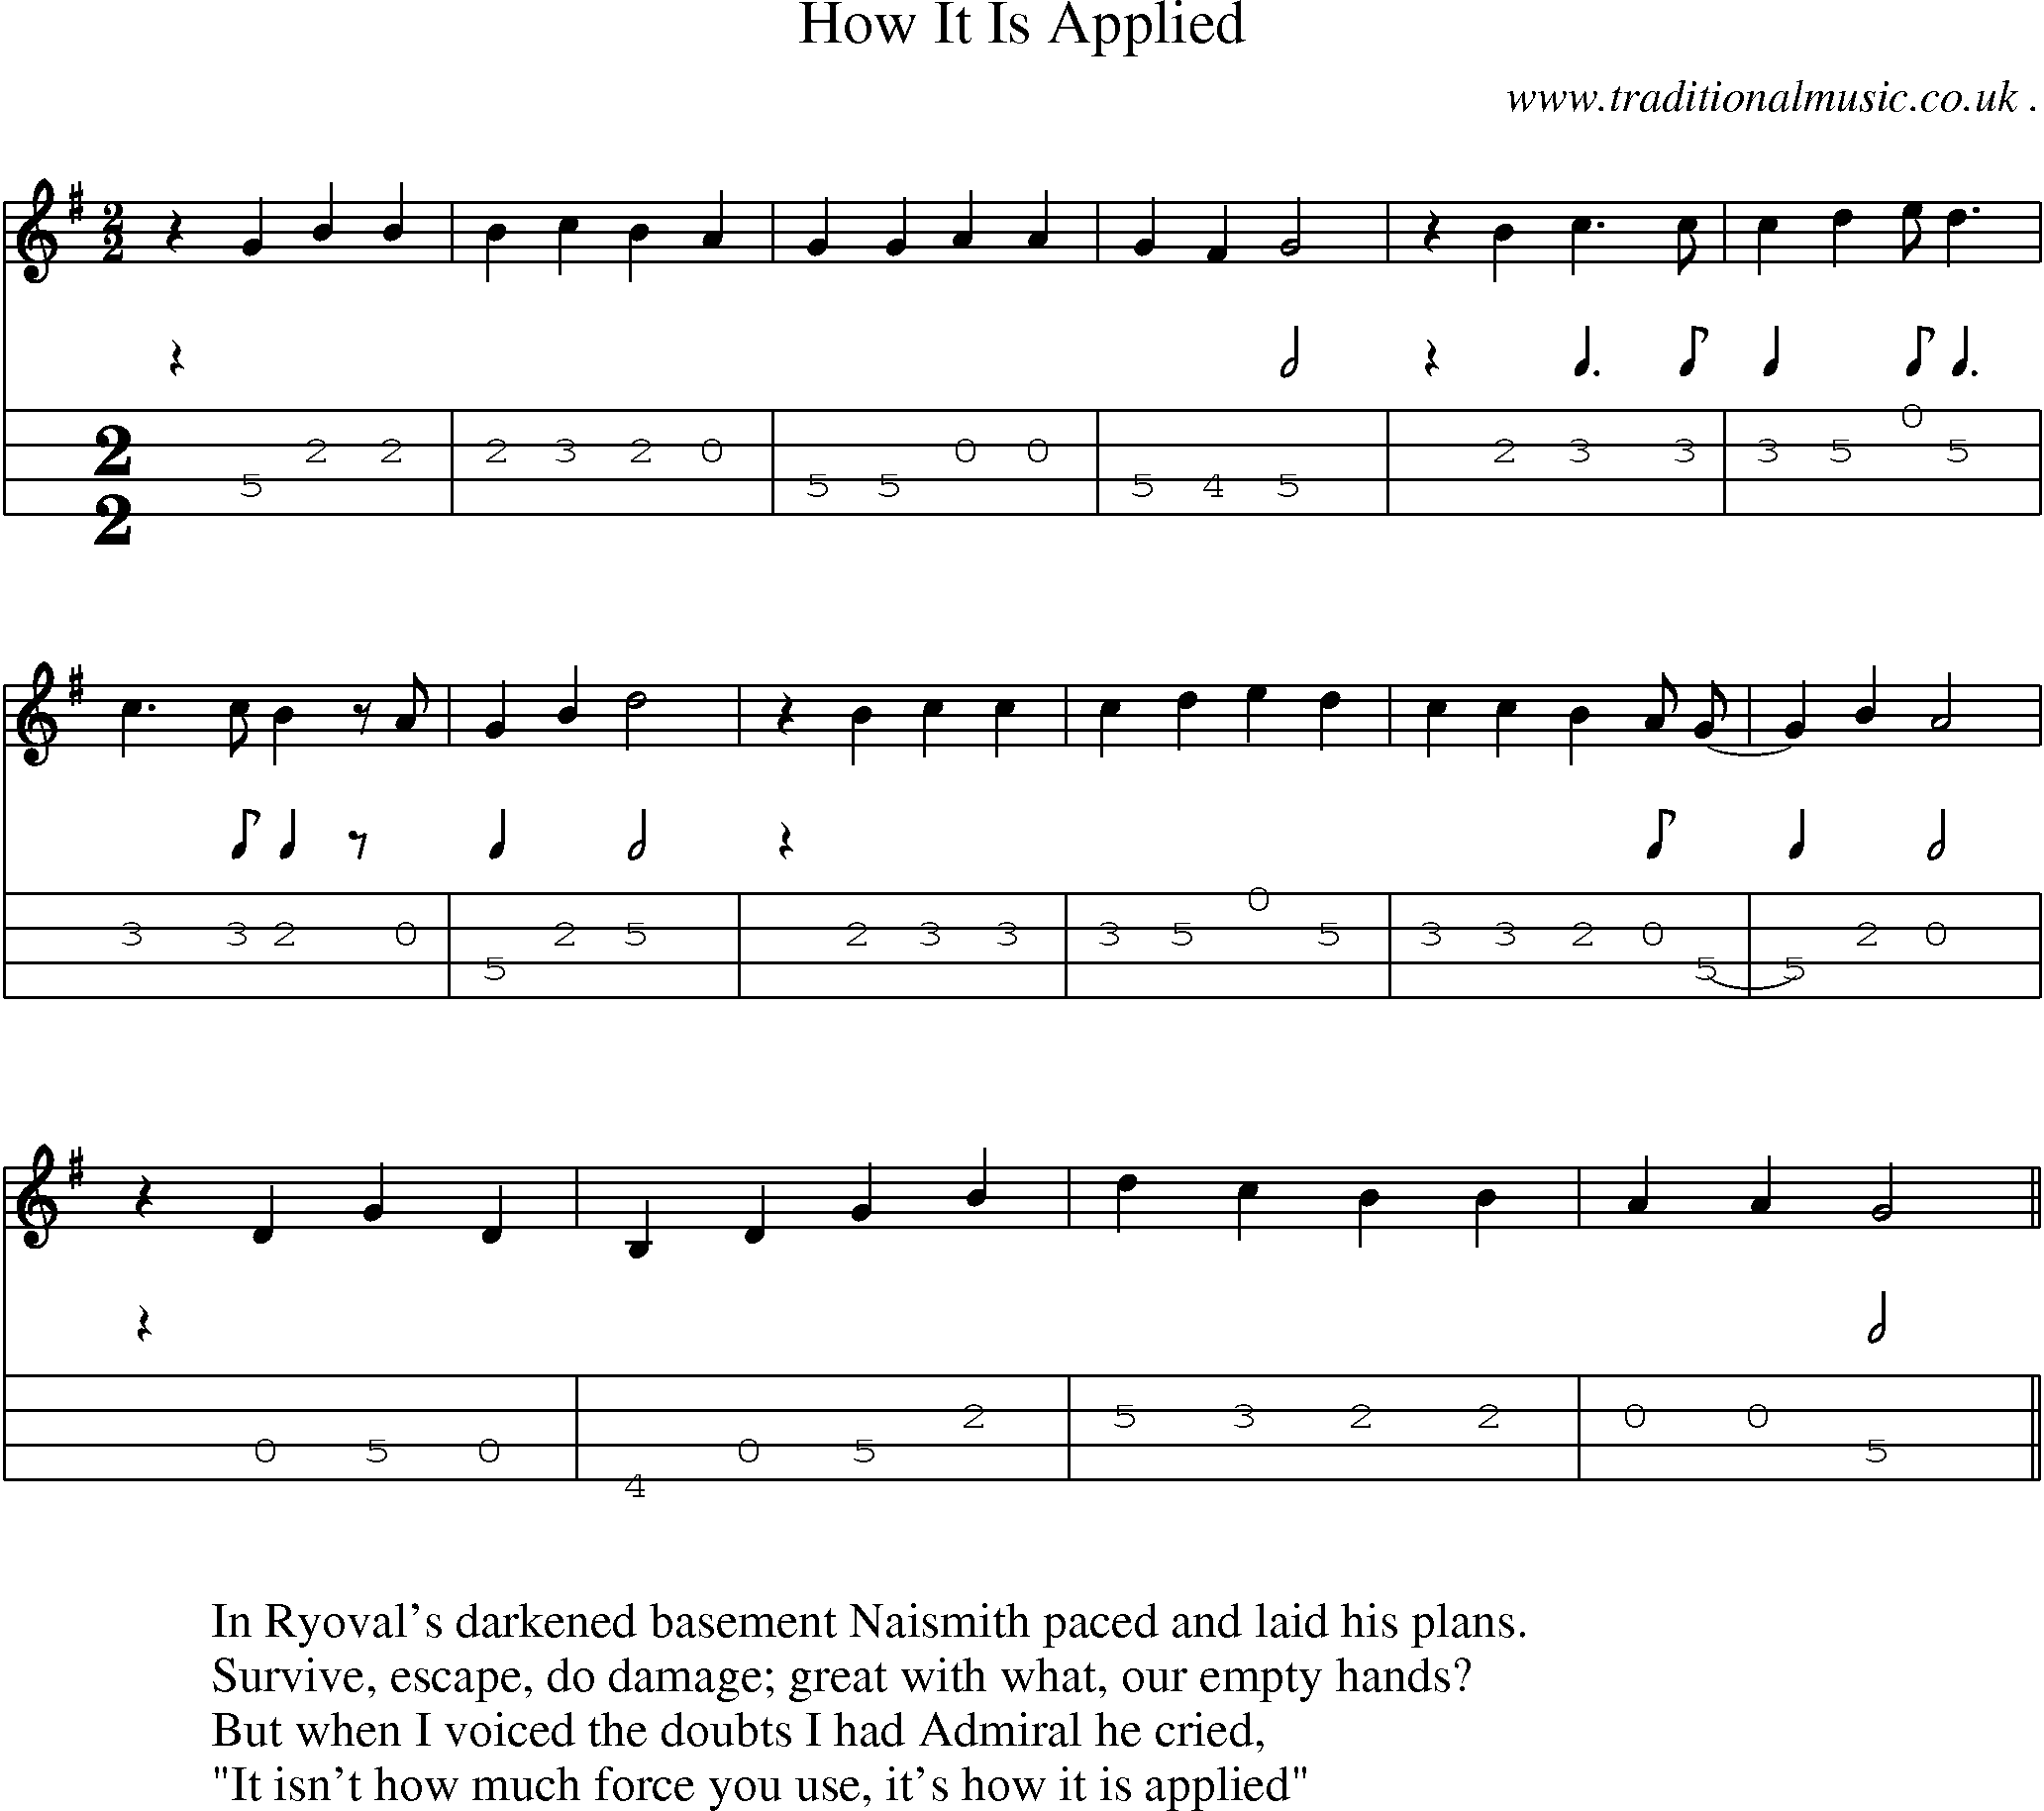 Sheet-Music and Mandolin Tabs for How It Is Applied